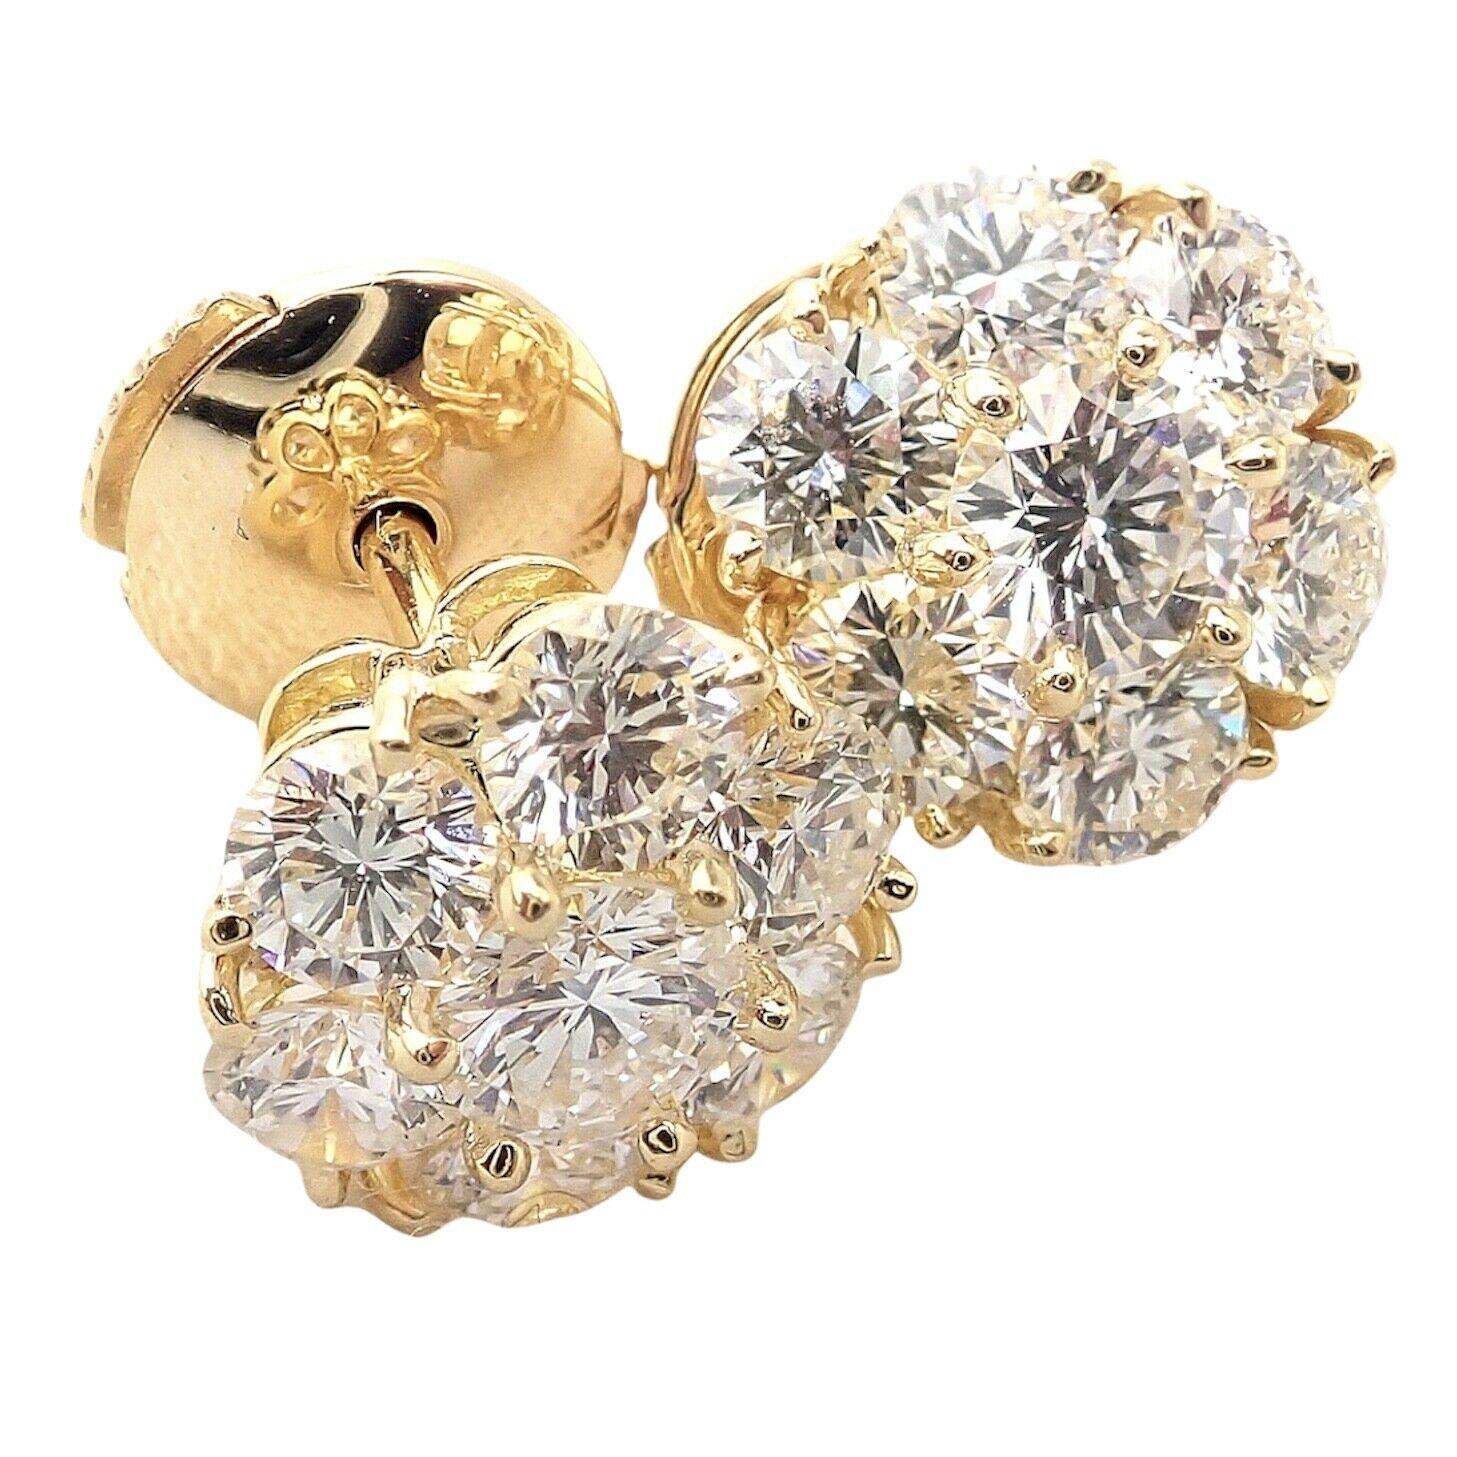 18k Yellow Gold Diamond Large Fleurette Flower Earrings by Van Cleef & Arpels. 
With 14 round brilliant cut diamonds VVS1 clarity, E color total weight approx. 1.88ct
These earrings come with Van Cleef & Arpels box and a service paper from a VCA